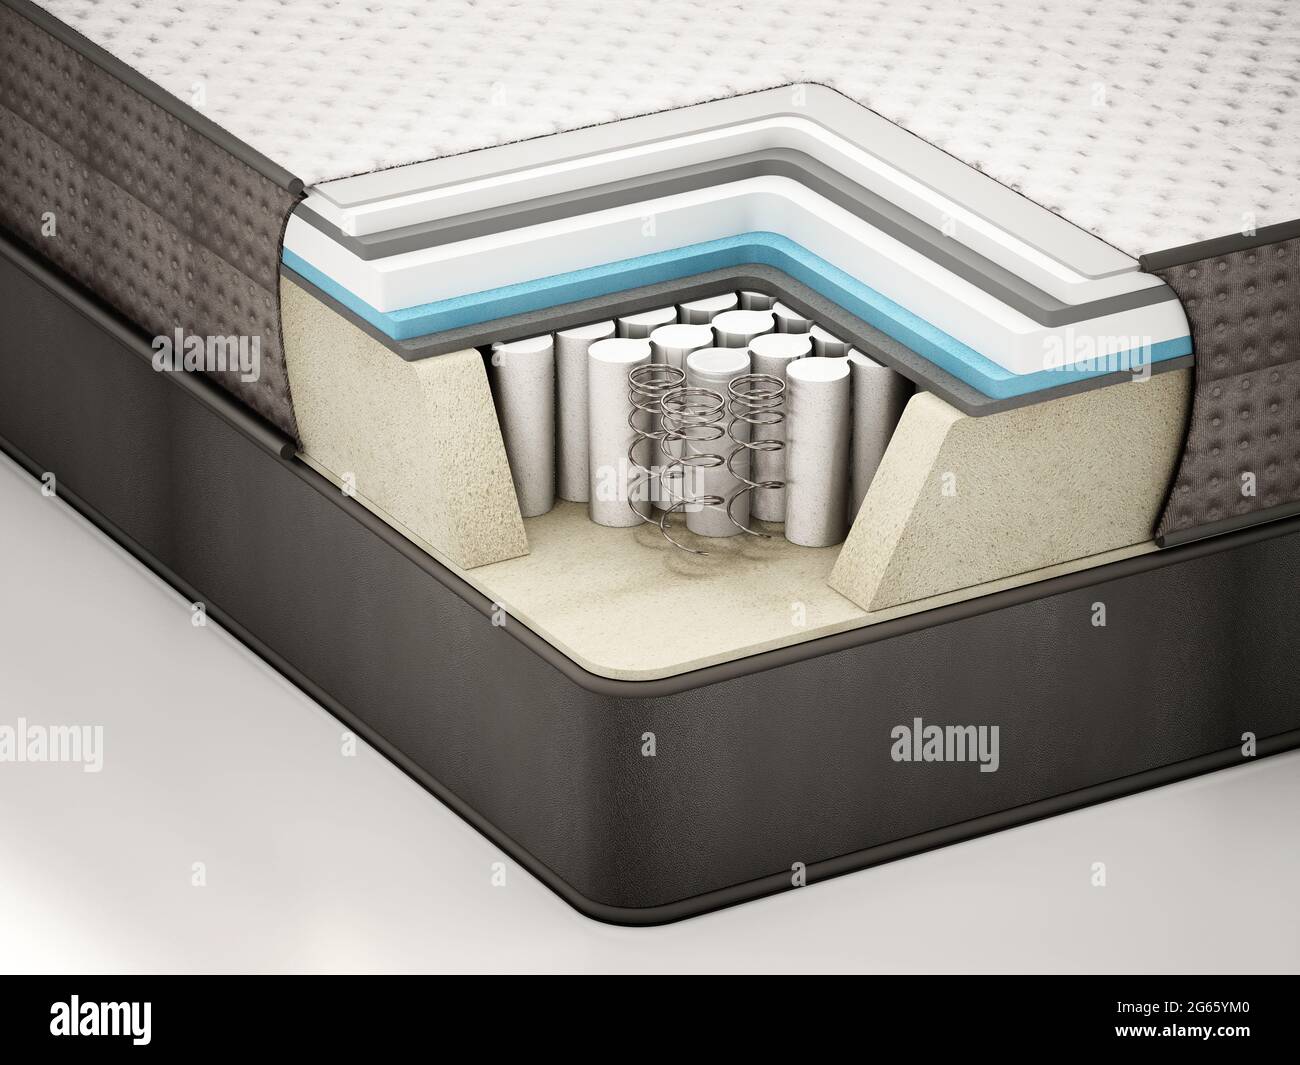 Cross section showing a mattress and the springs inside. 3D illustration. Stock Photo